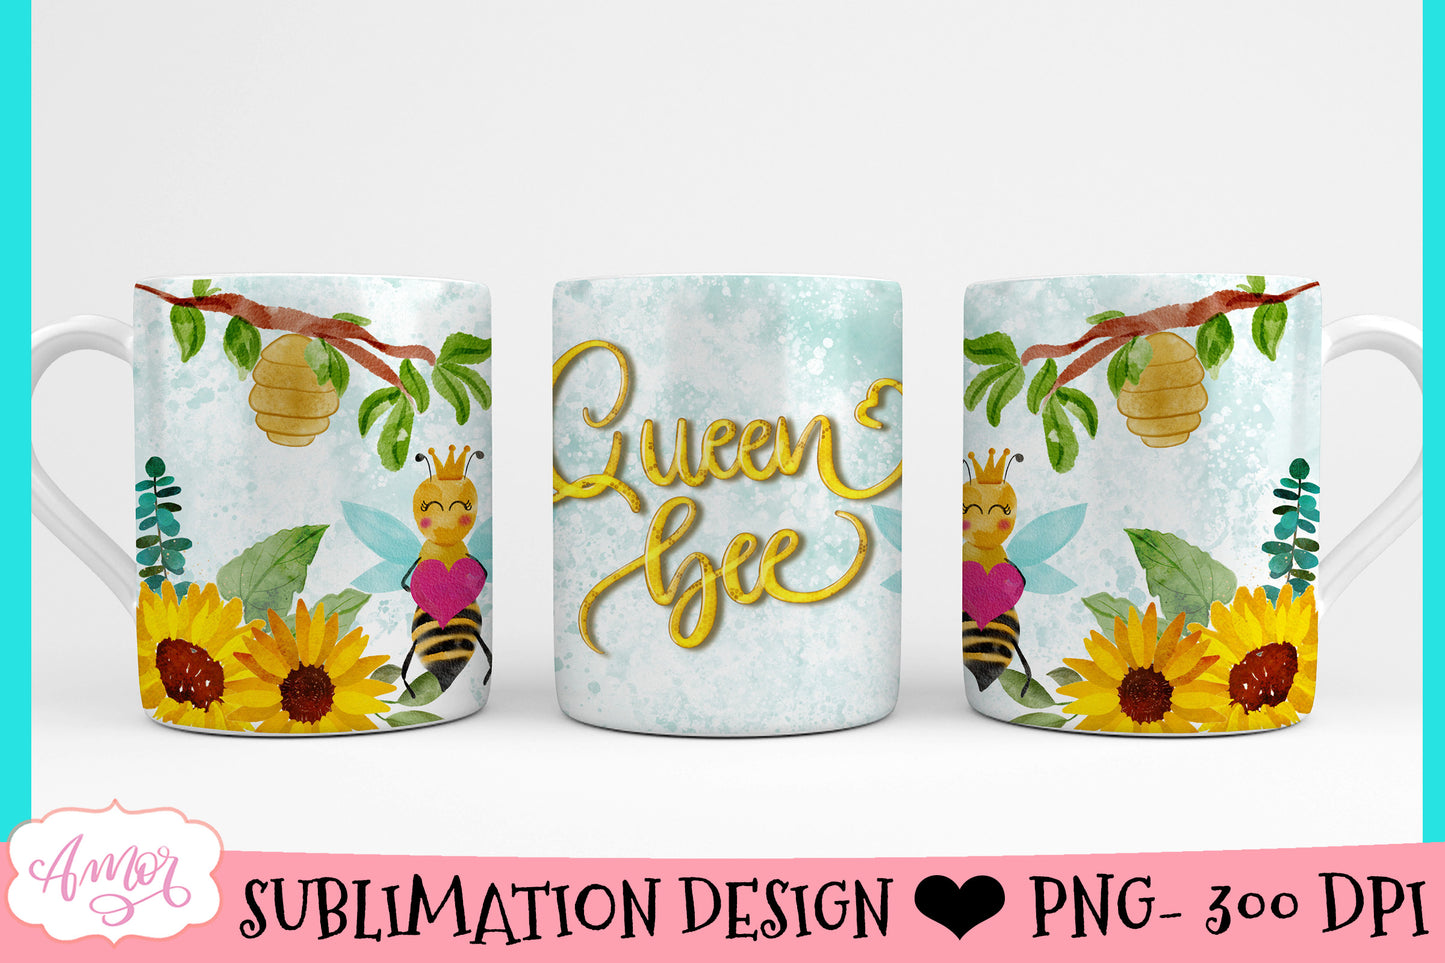 Queen bee mug wrap for sublimation